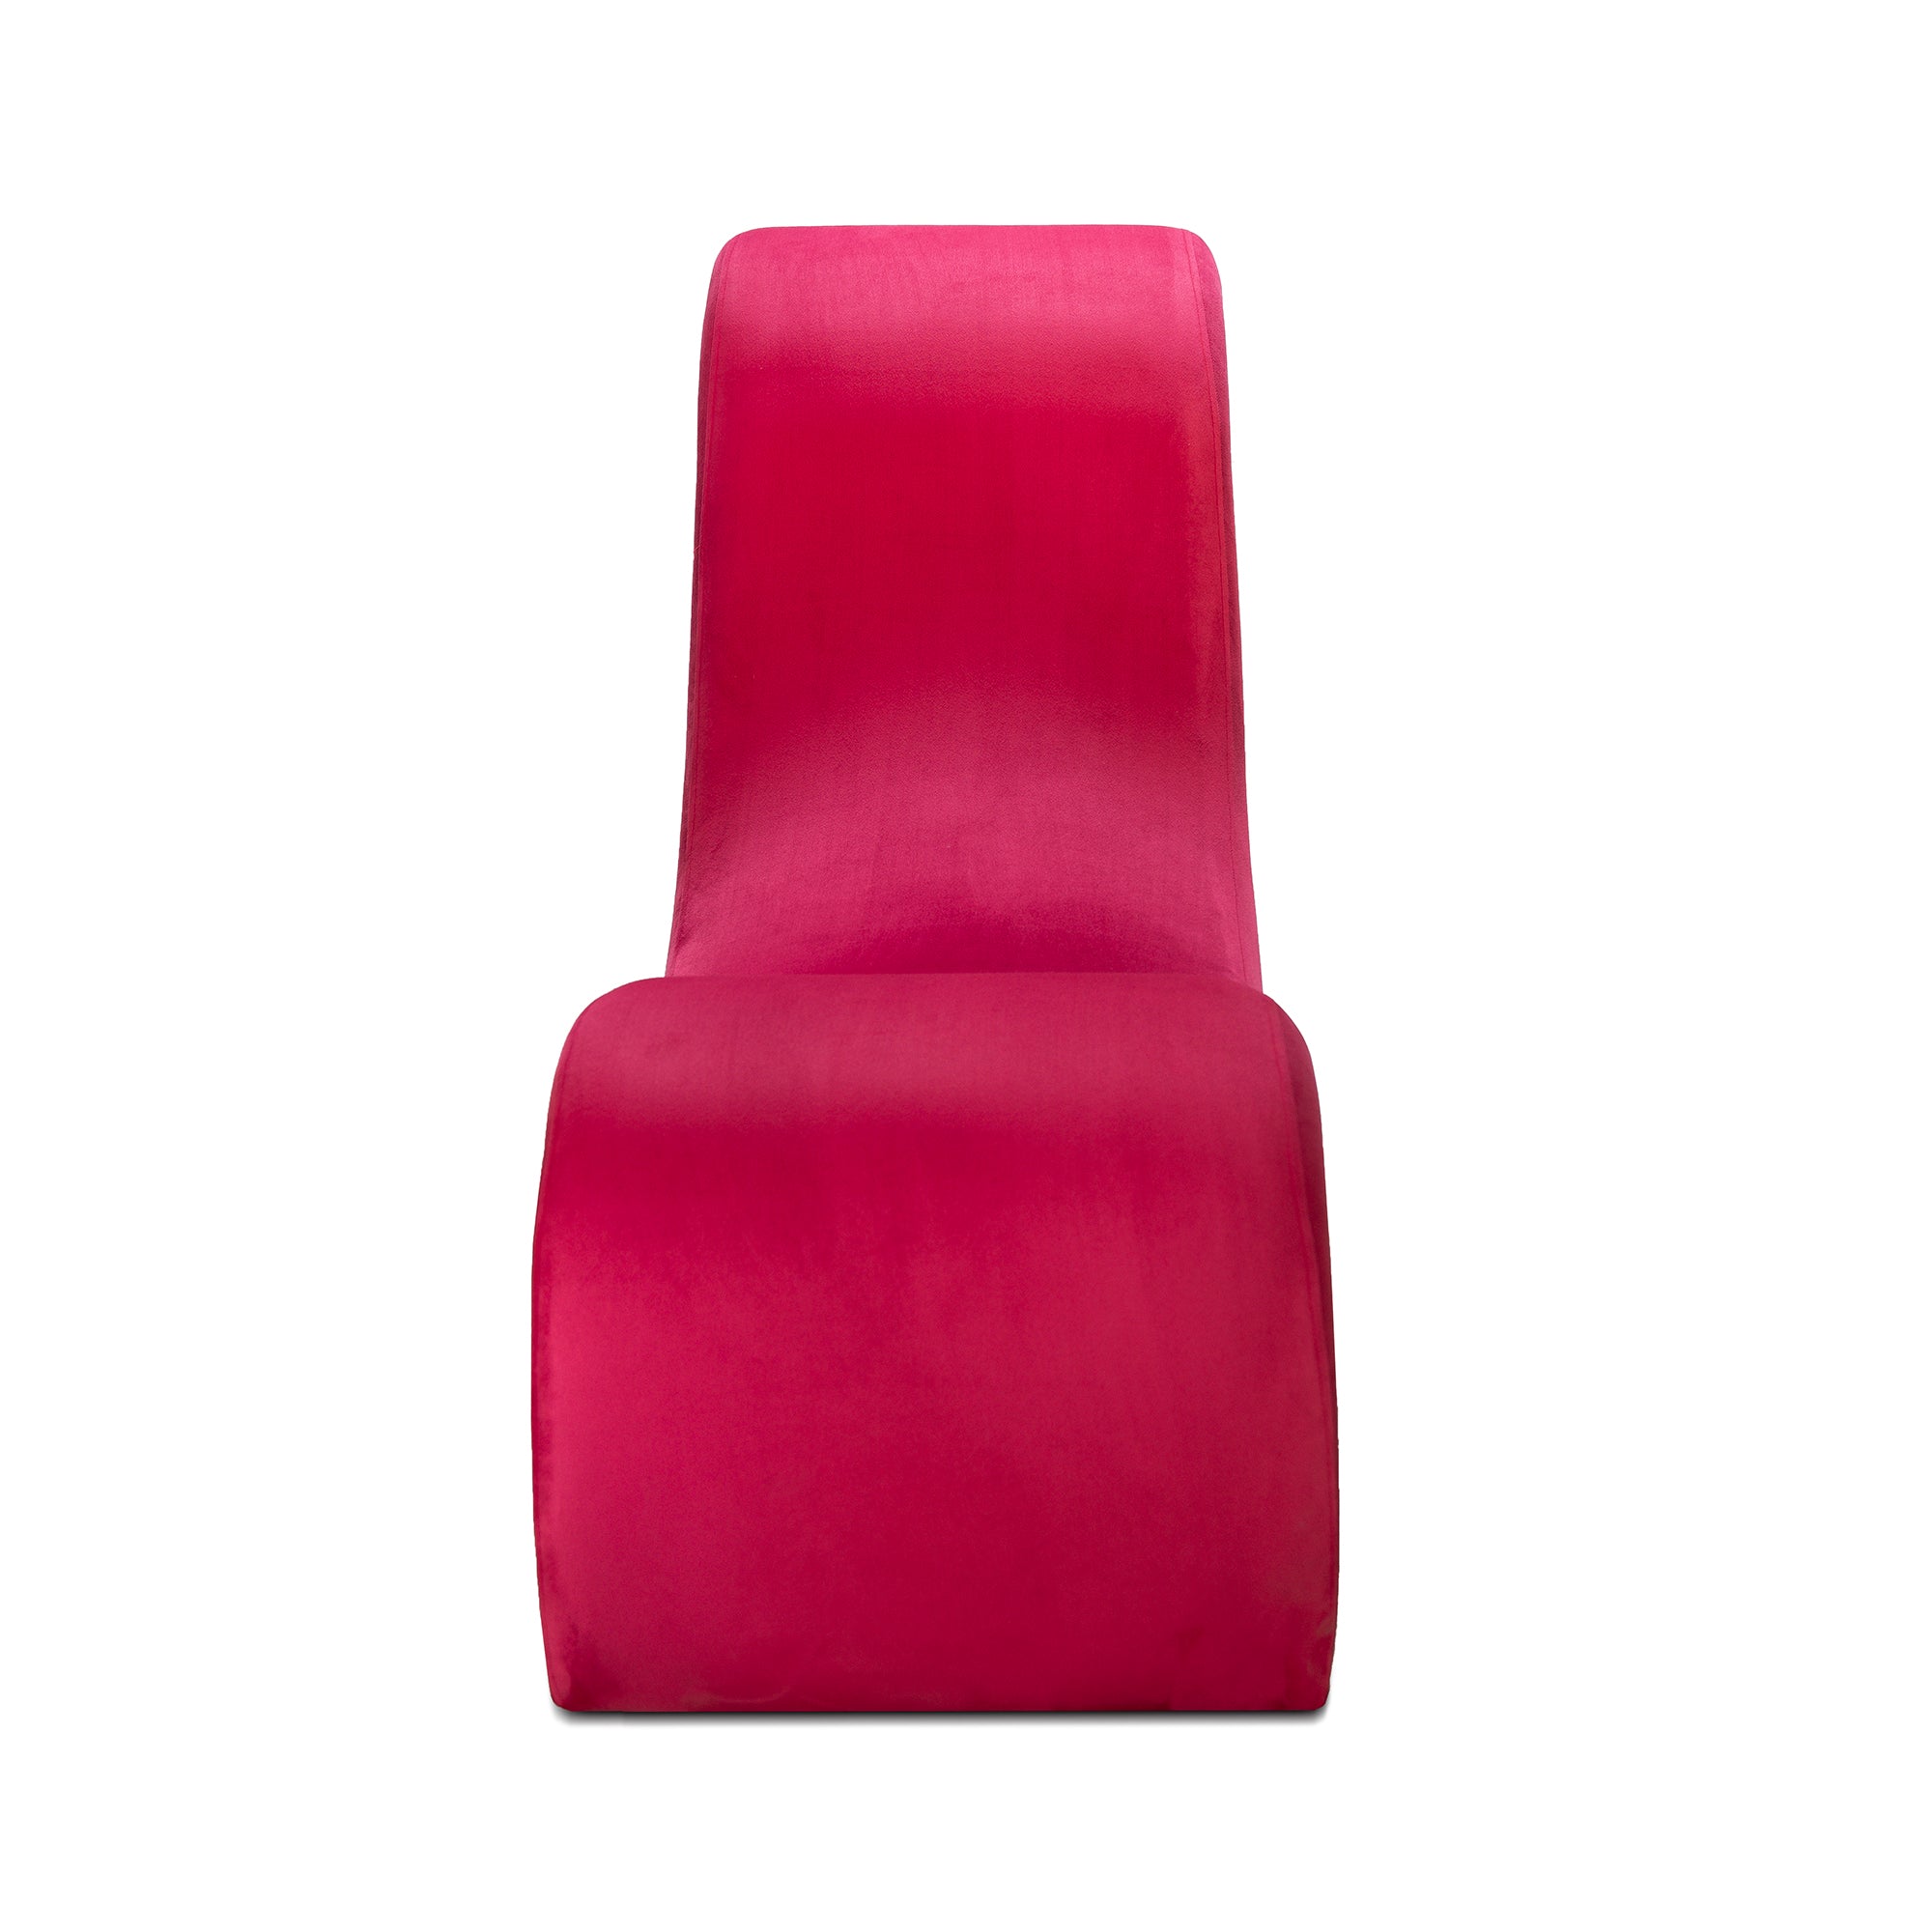 Chaise Loungers Red